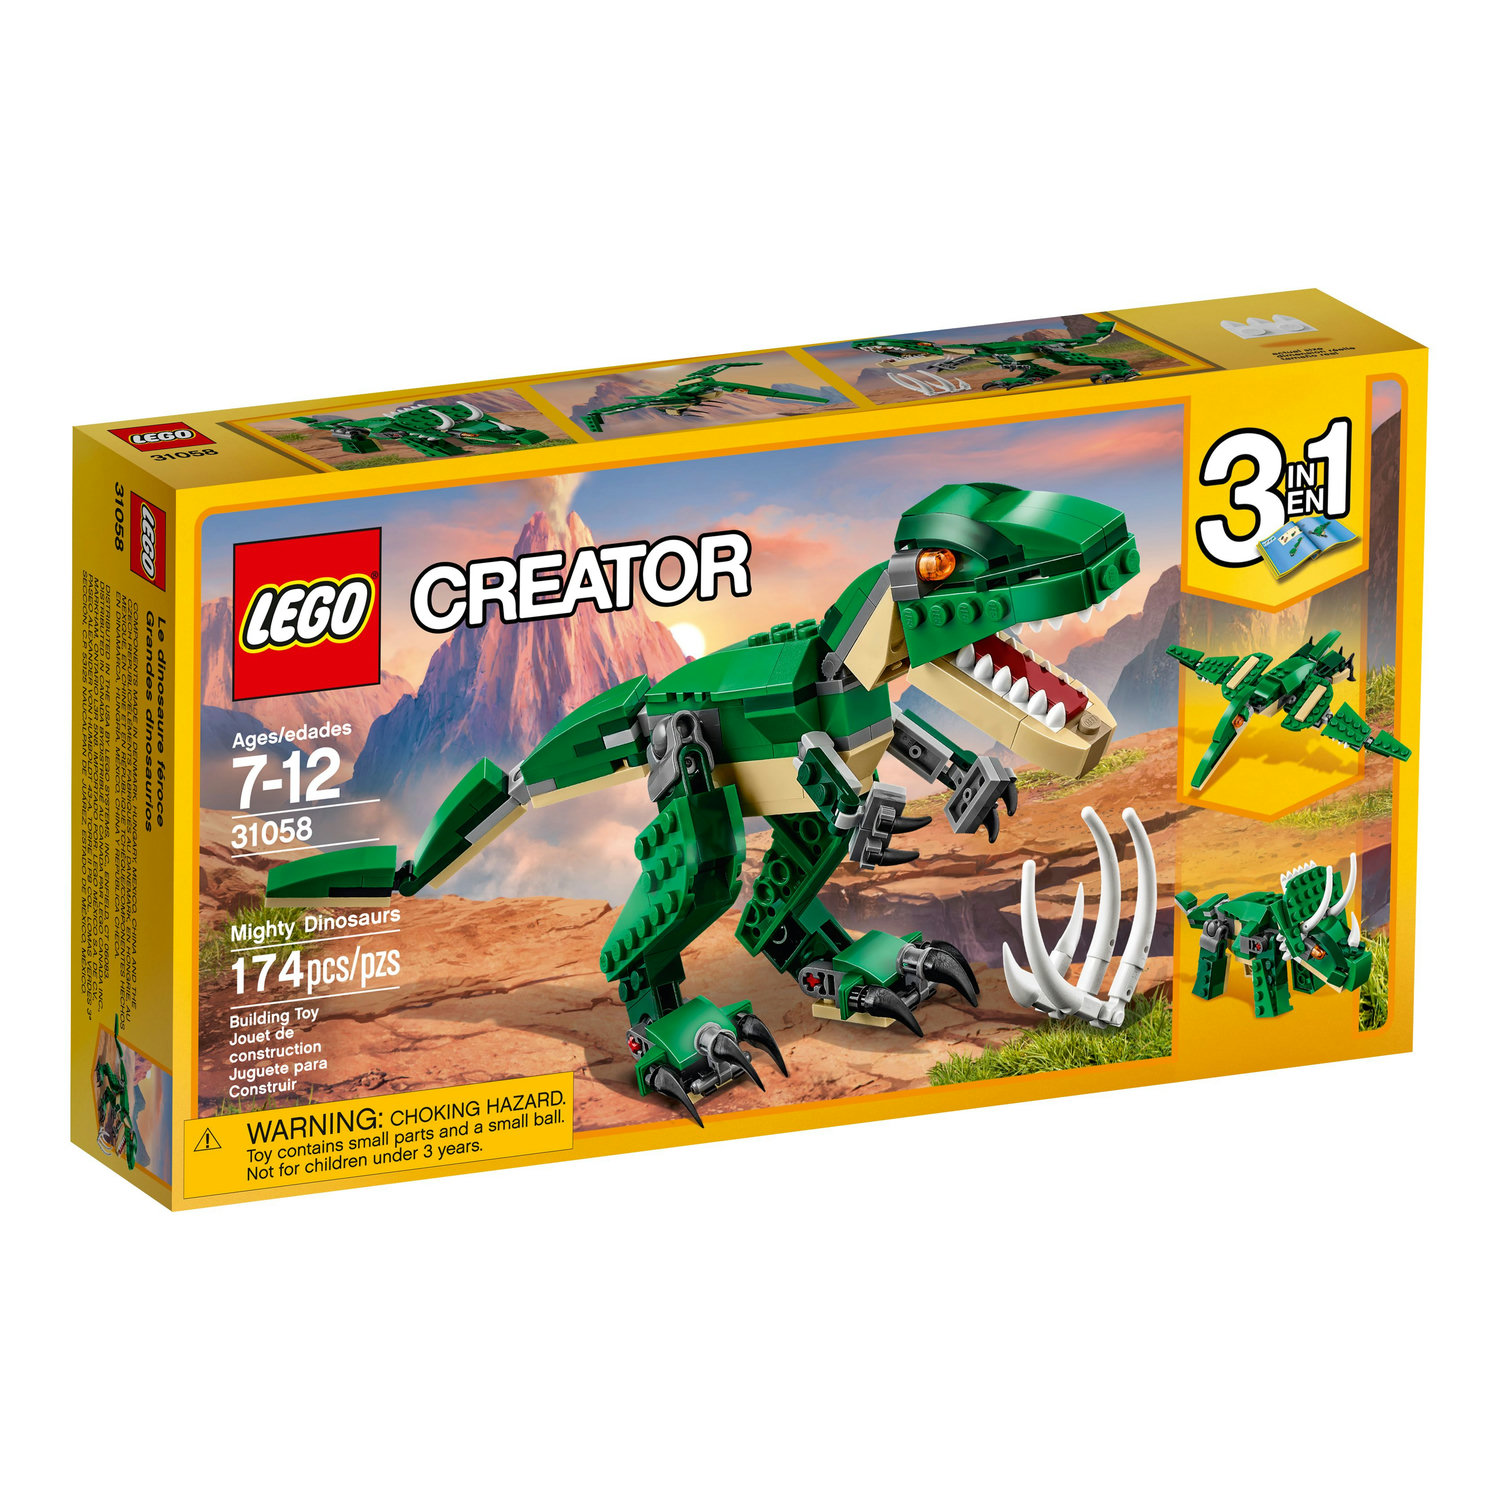 LEGO Creator 3 in 1 Mighty Dinosaur Toy, Transforms from T. rex to Triceratops to Pterodactyl Dinosaur Figures, Great Gift for 7 - 12 Year Old Boys & Girls, 31058 - image 2 of 4